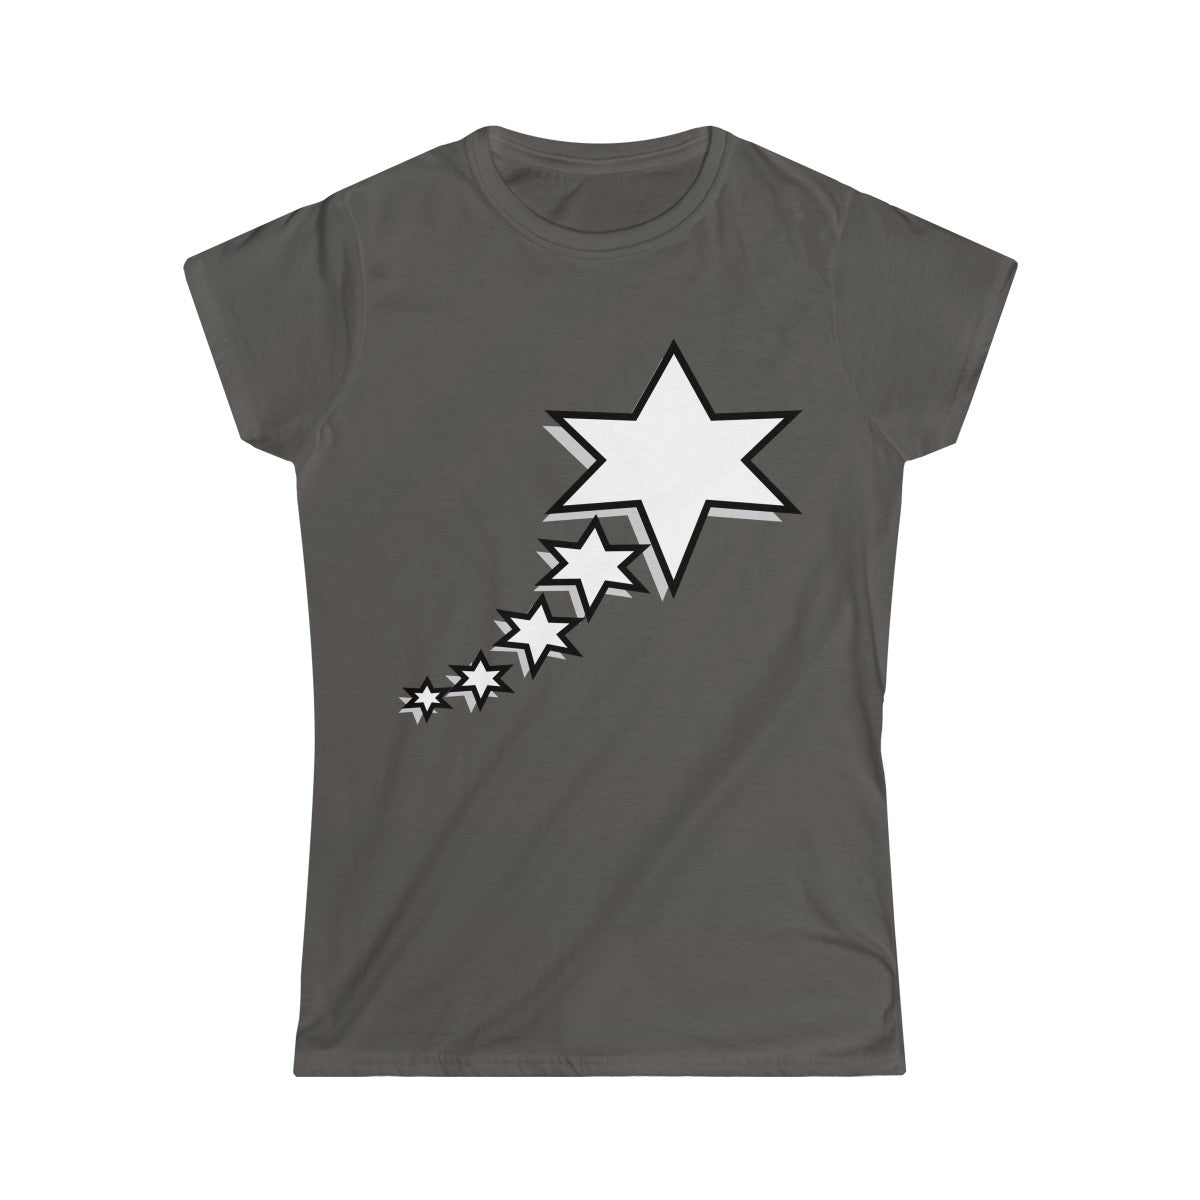 Women's Softstyle Tee - 6 Points 5 Stars (White)